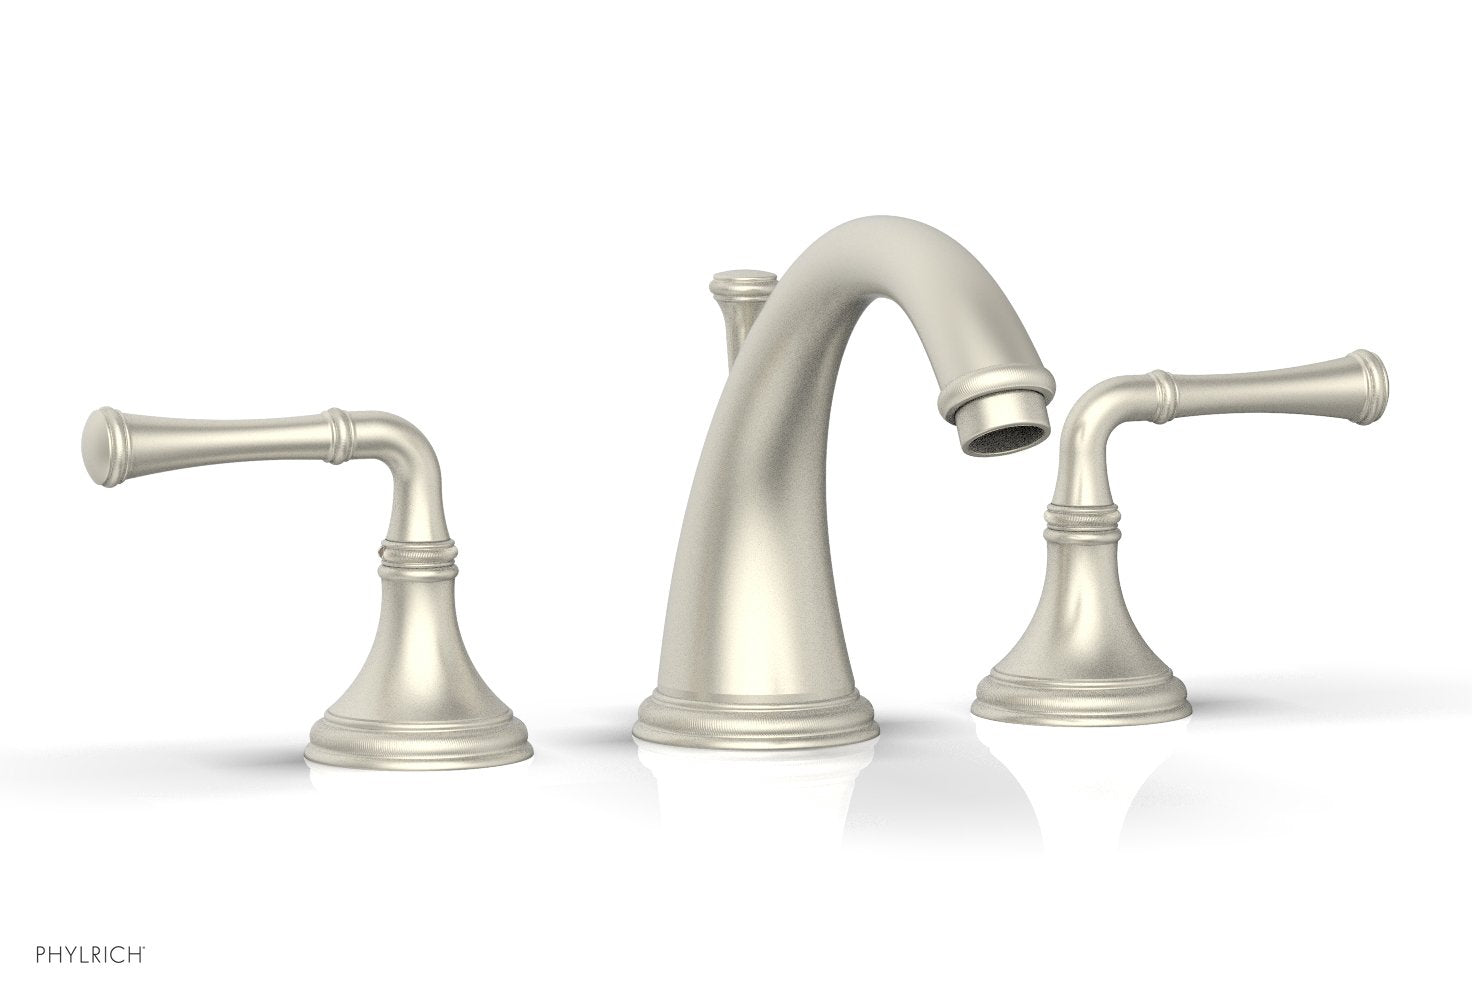 Phylrich COINED Widespread Faucet